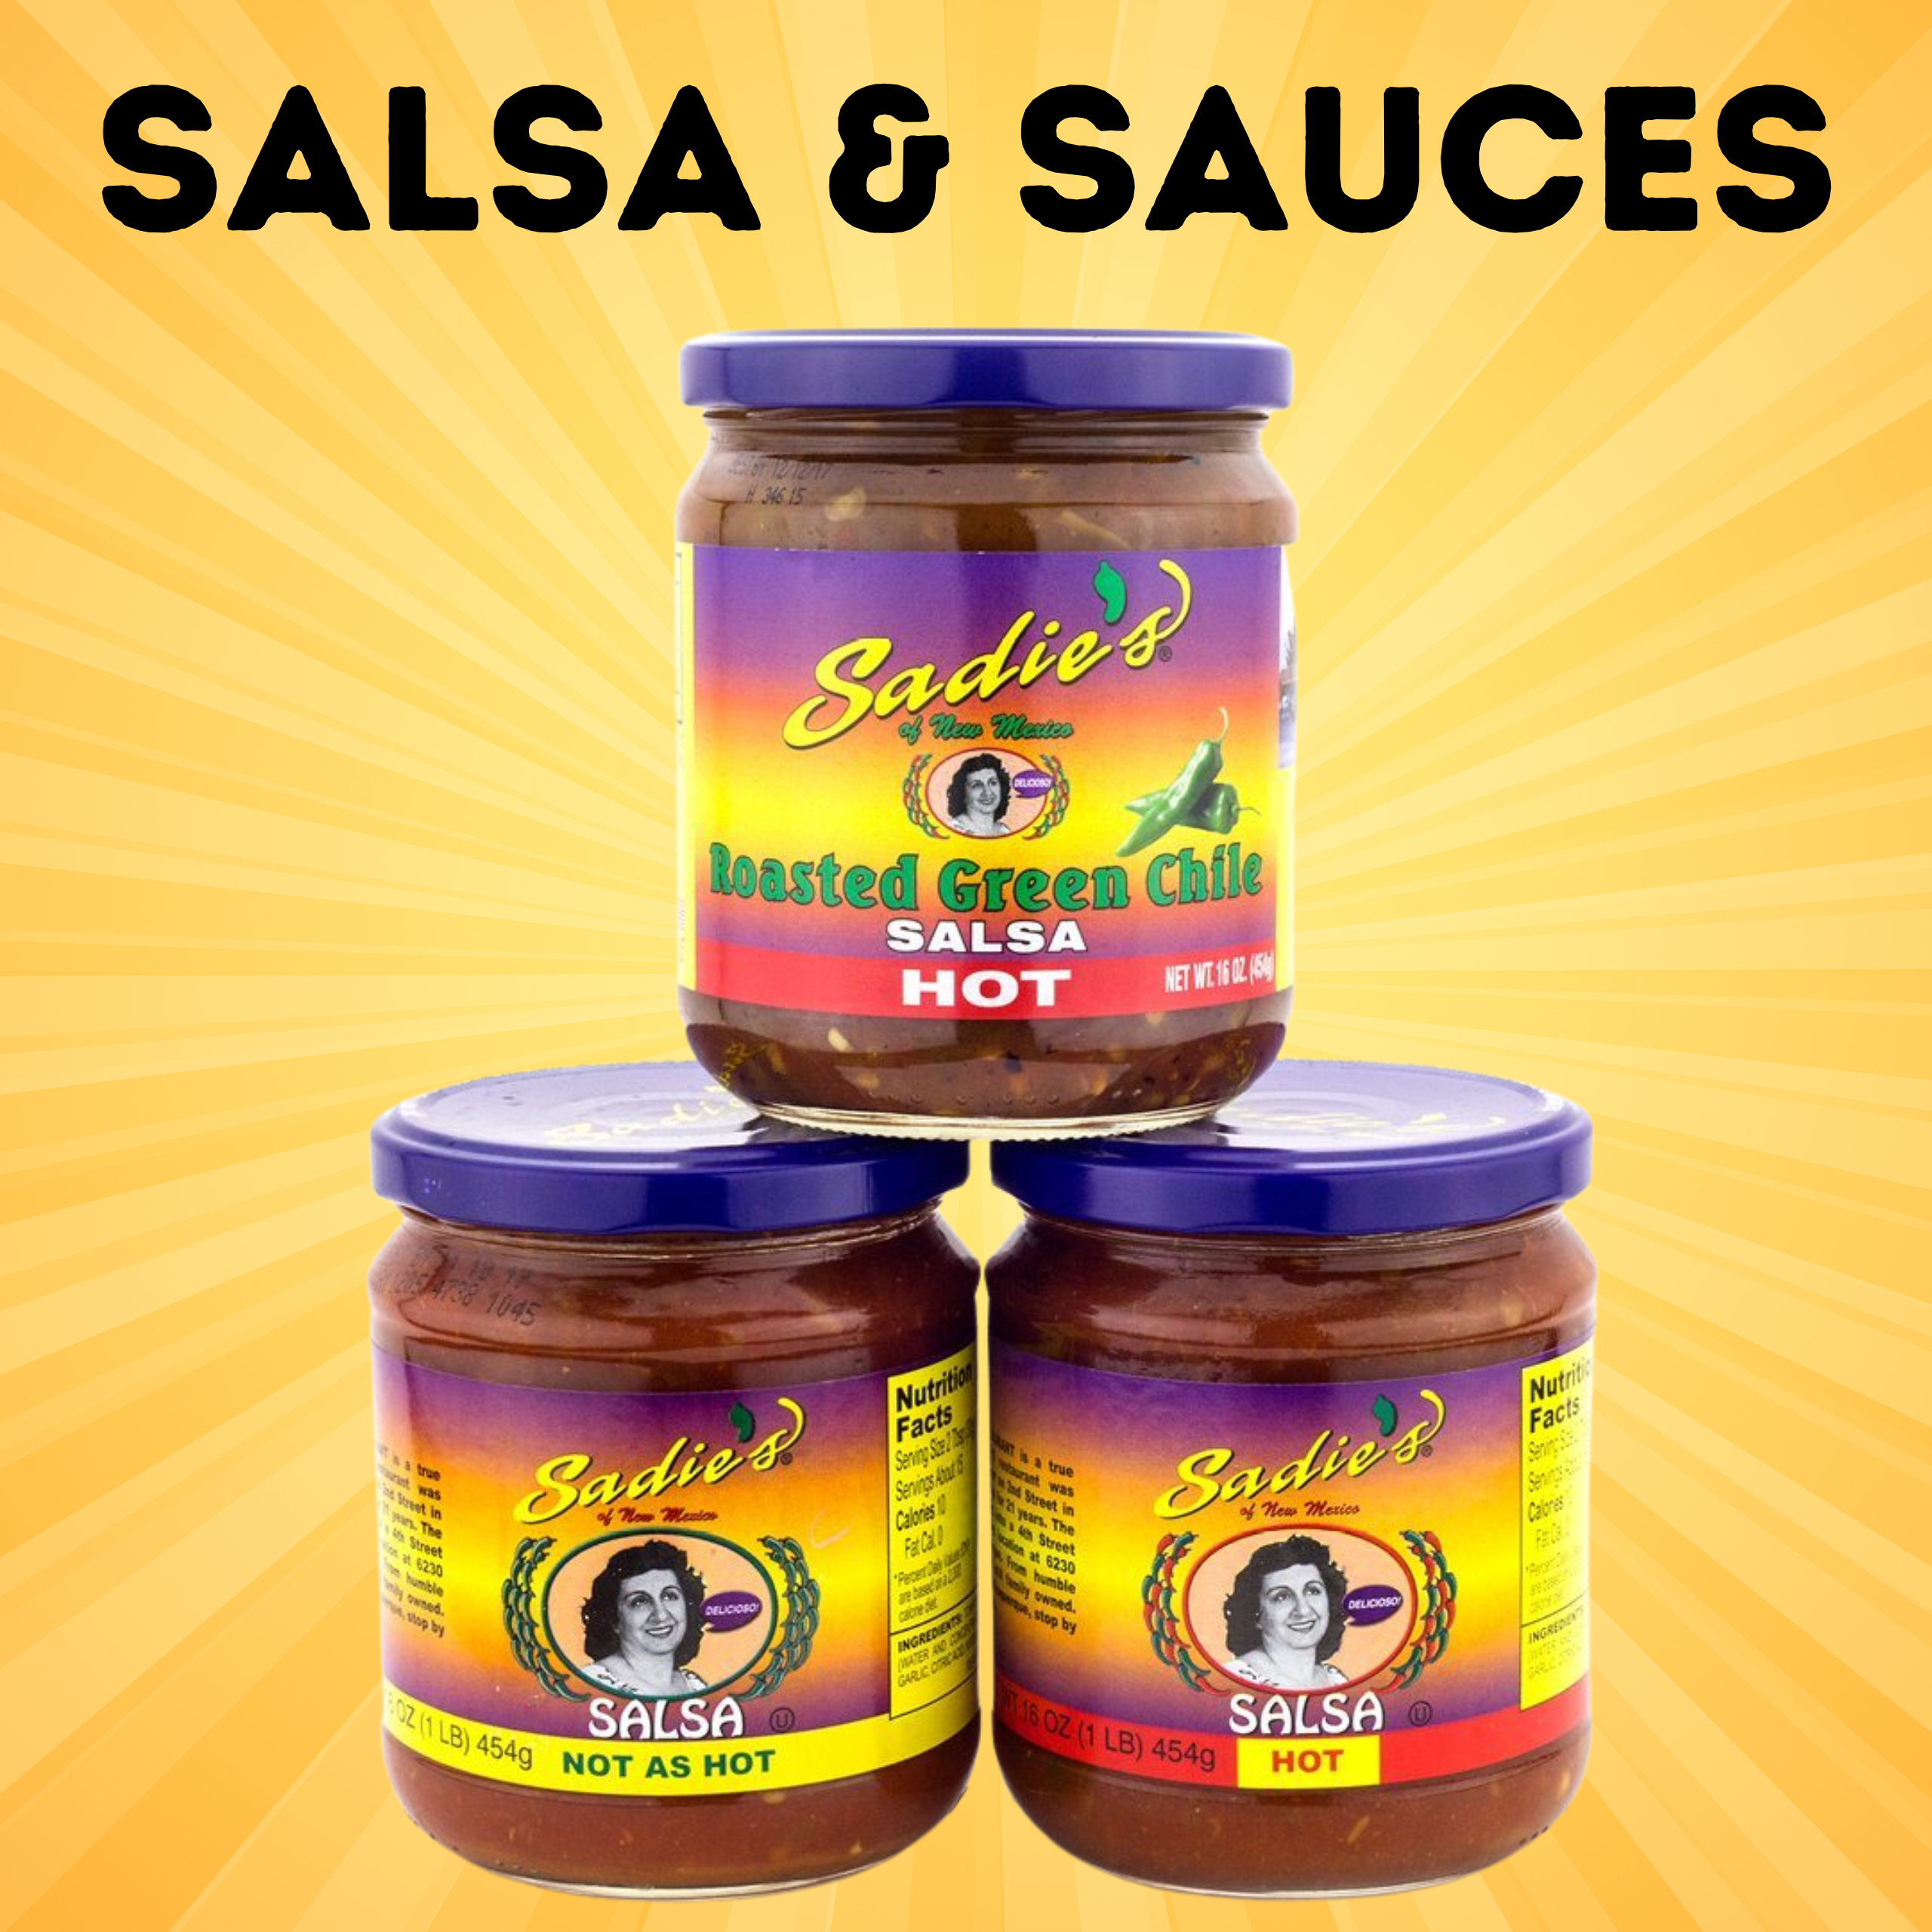 Link to purchase salsa